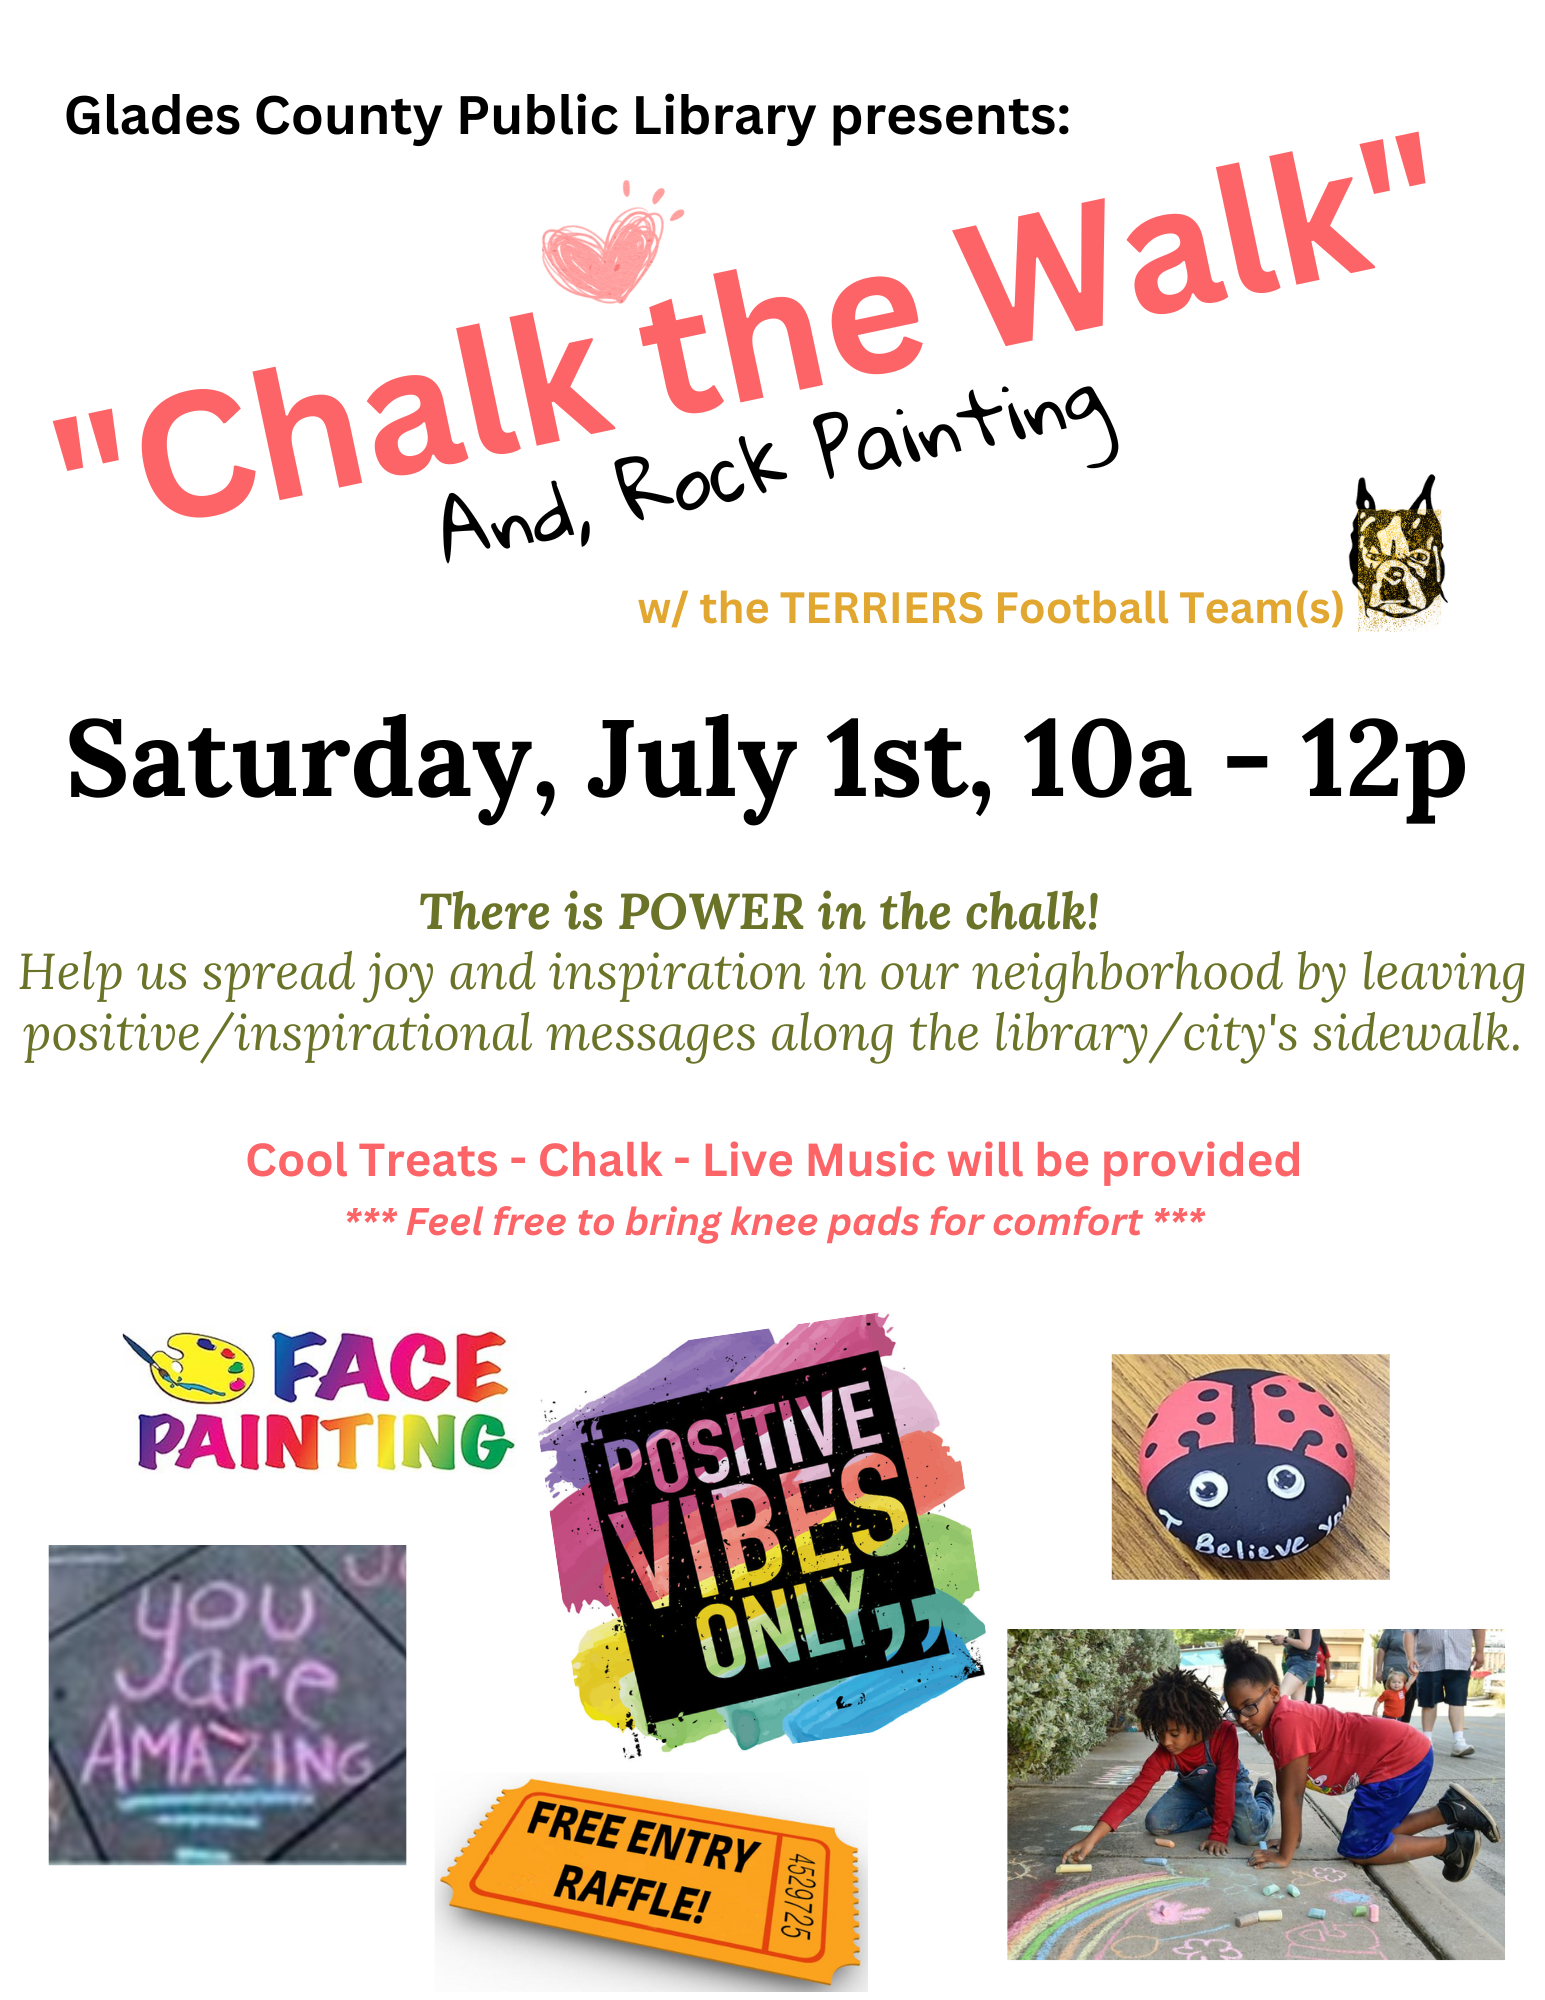 Glades County Library will be hosting a Chalk the Walk on Saturday, July 1, 2023 from 10 .m. to 12 p.m. Participants will be able to leave positive messages on the sidewalks using chalk, get cool treats and listen to live music. Special guest: Terriers Football Team(s) will be in attendance. 